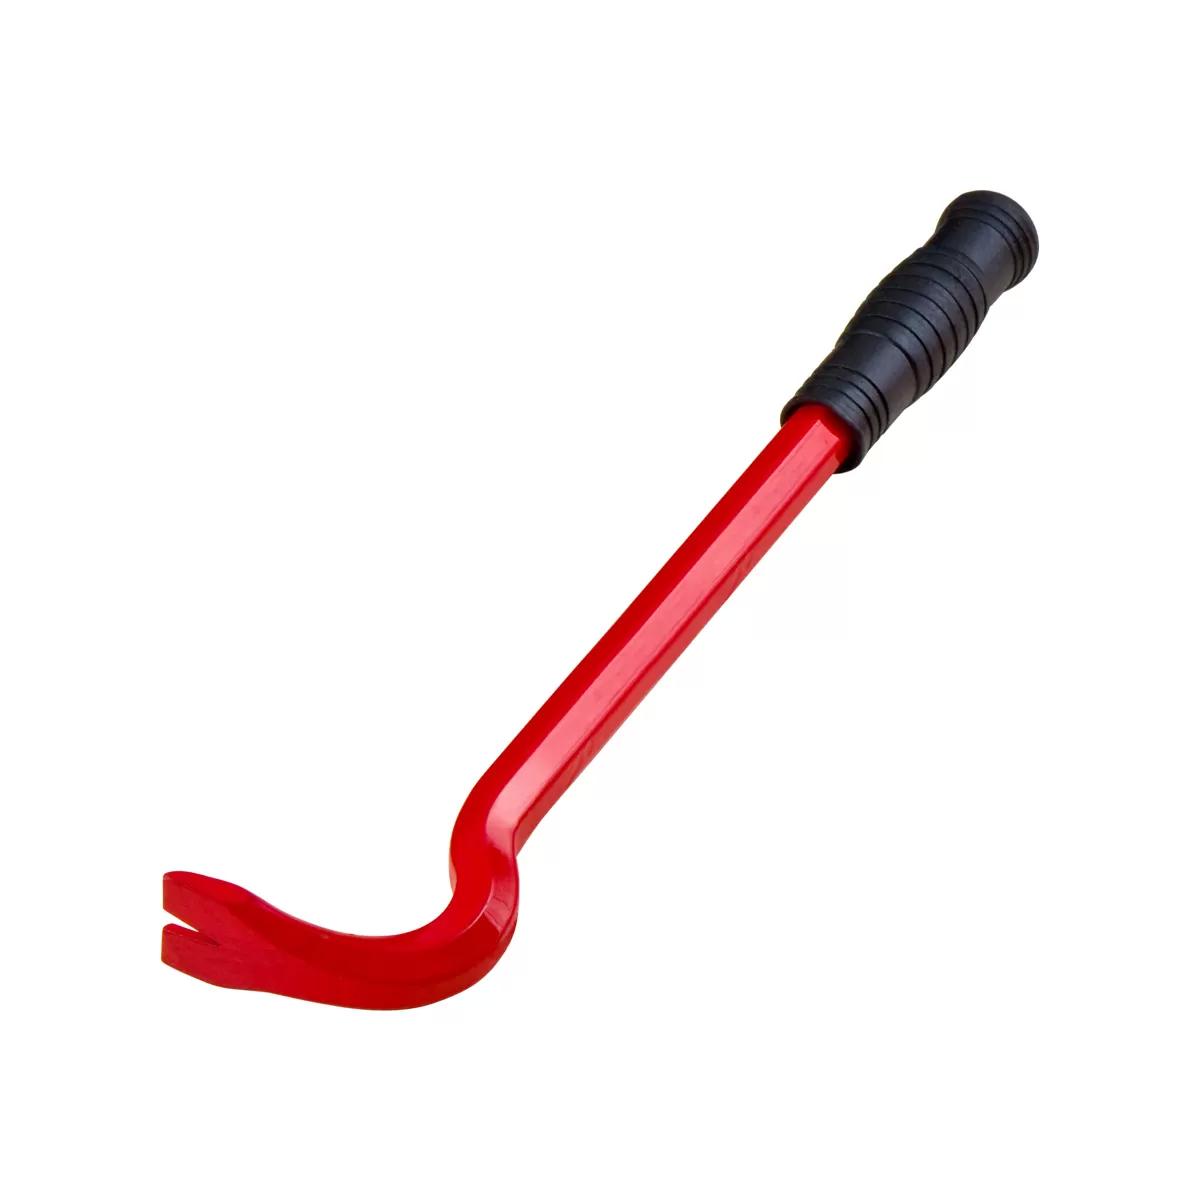 Wrecking bar with rubber grip 300mm 